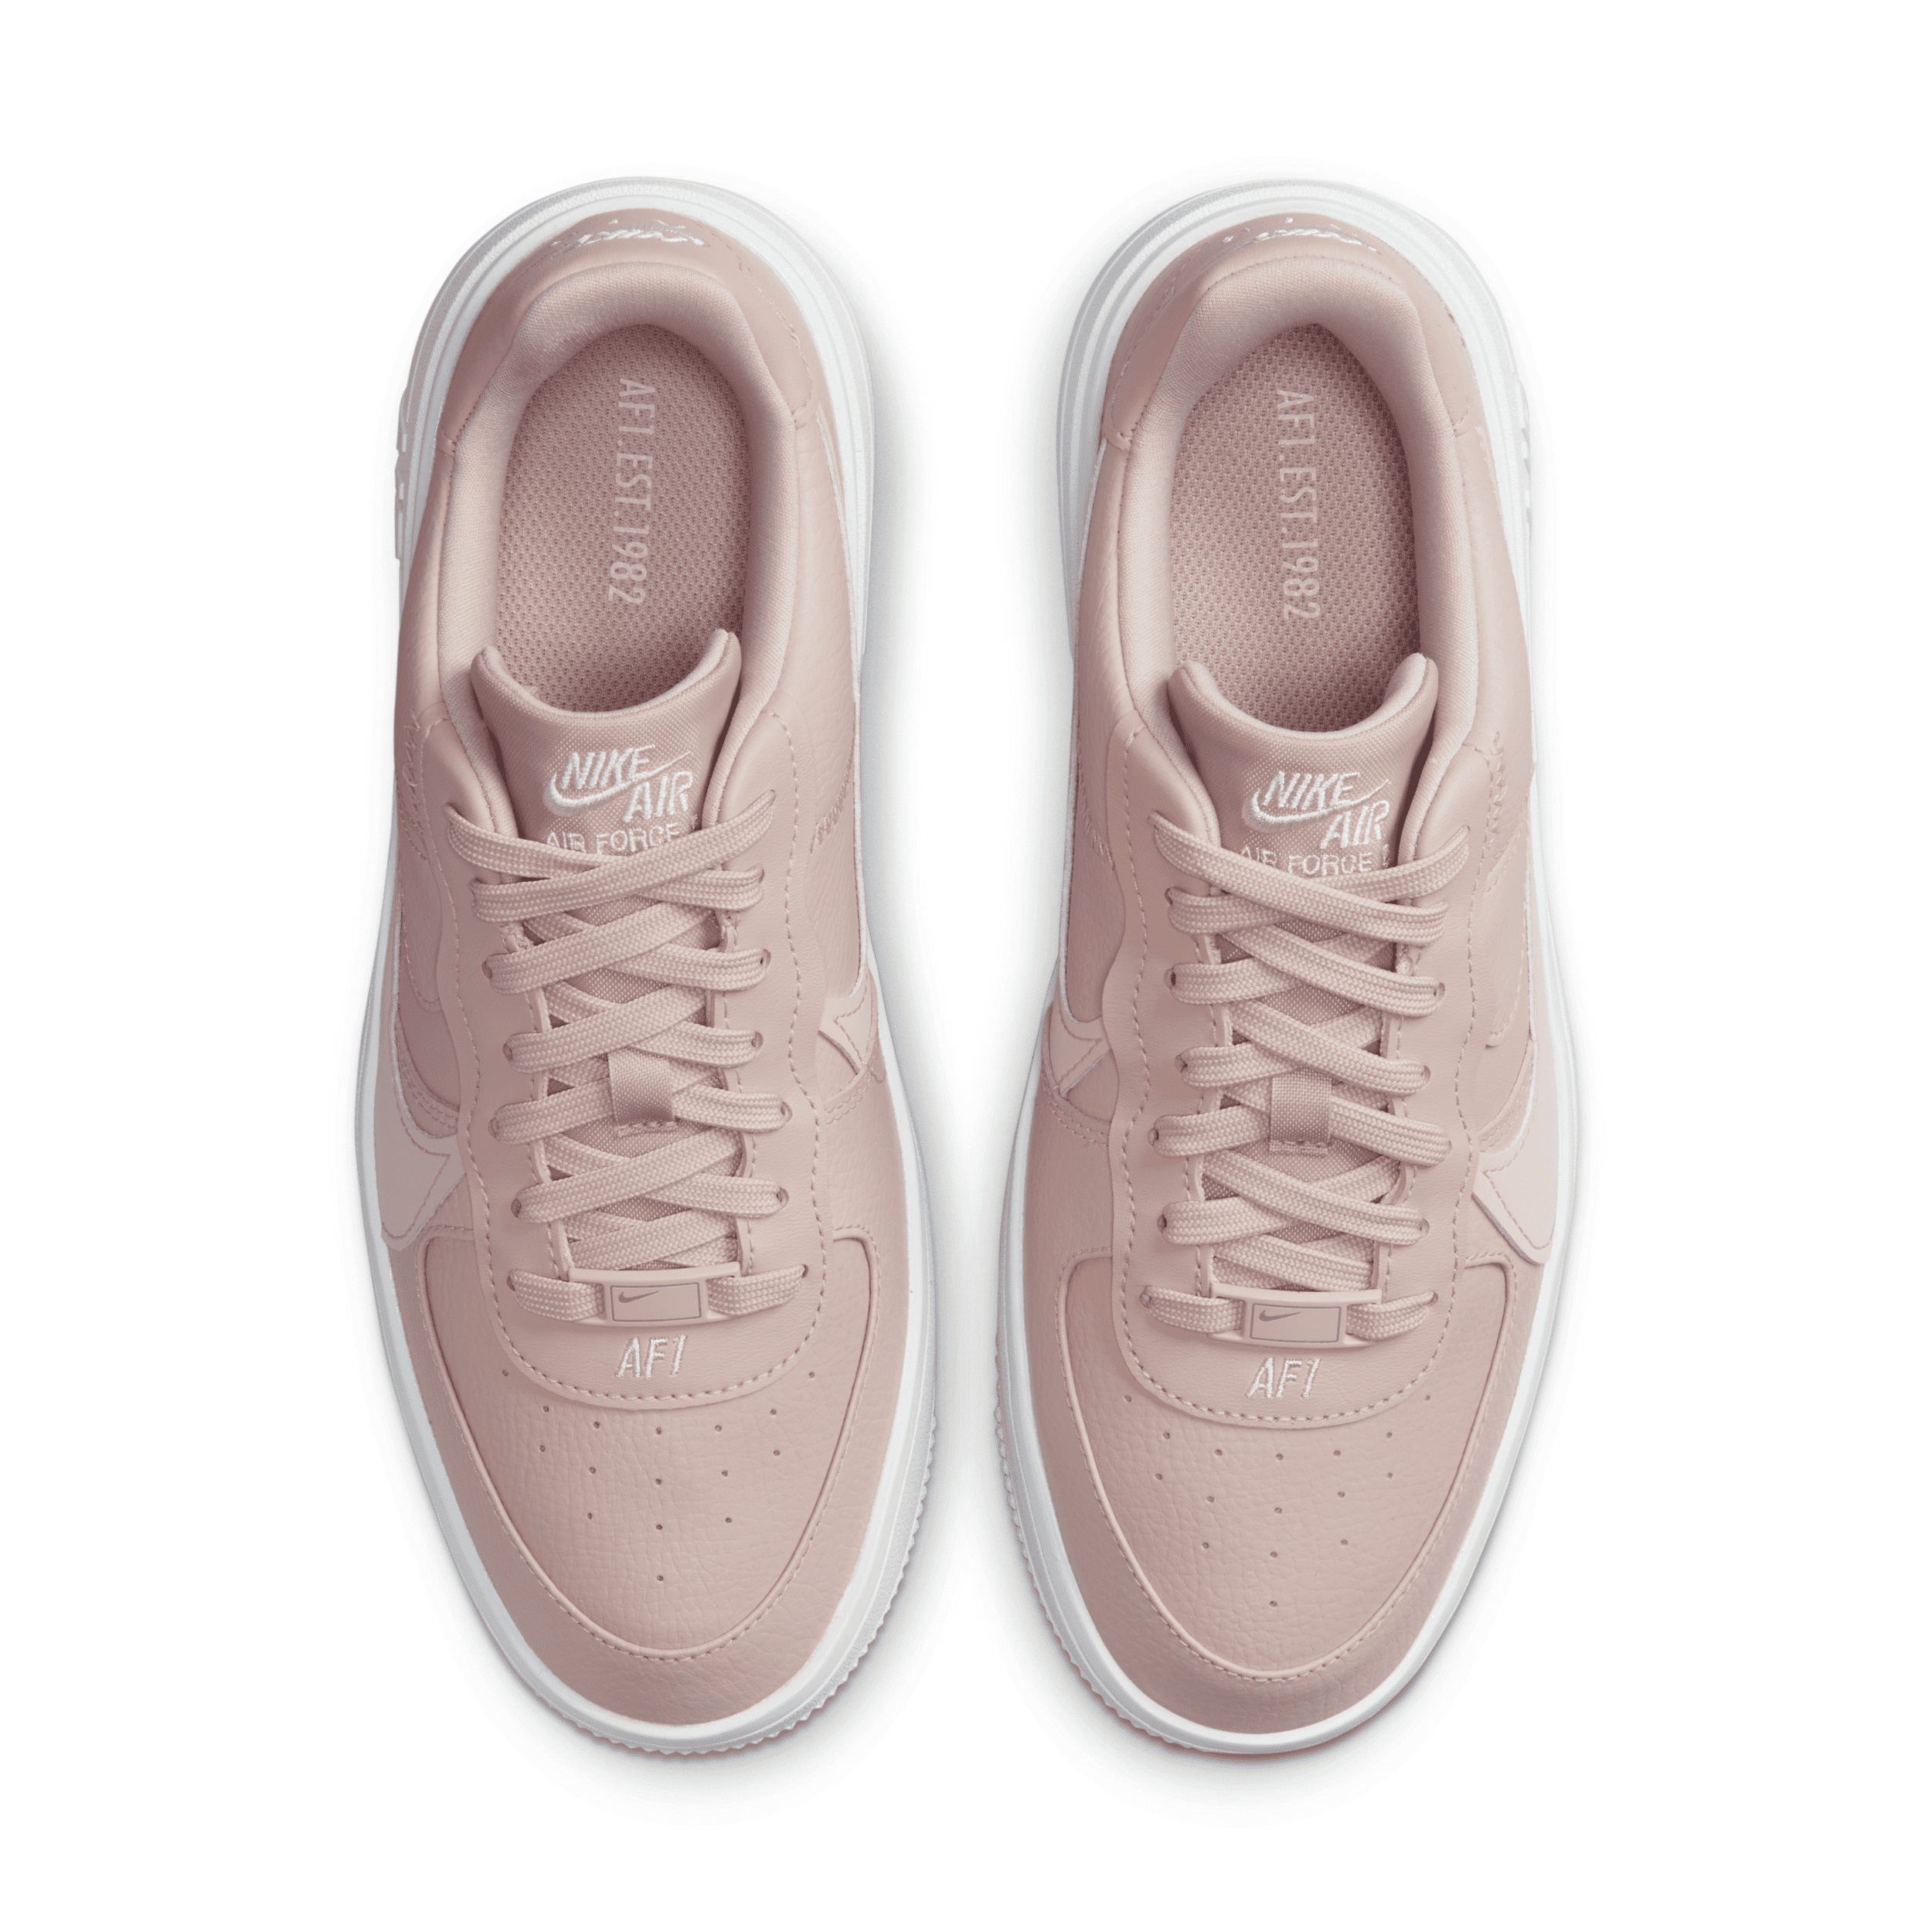 Nike Women's Air Force 1 PLT.AF.ORM Shoes - 5